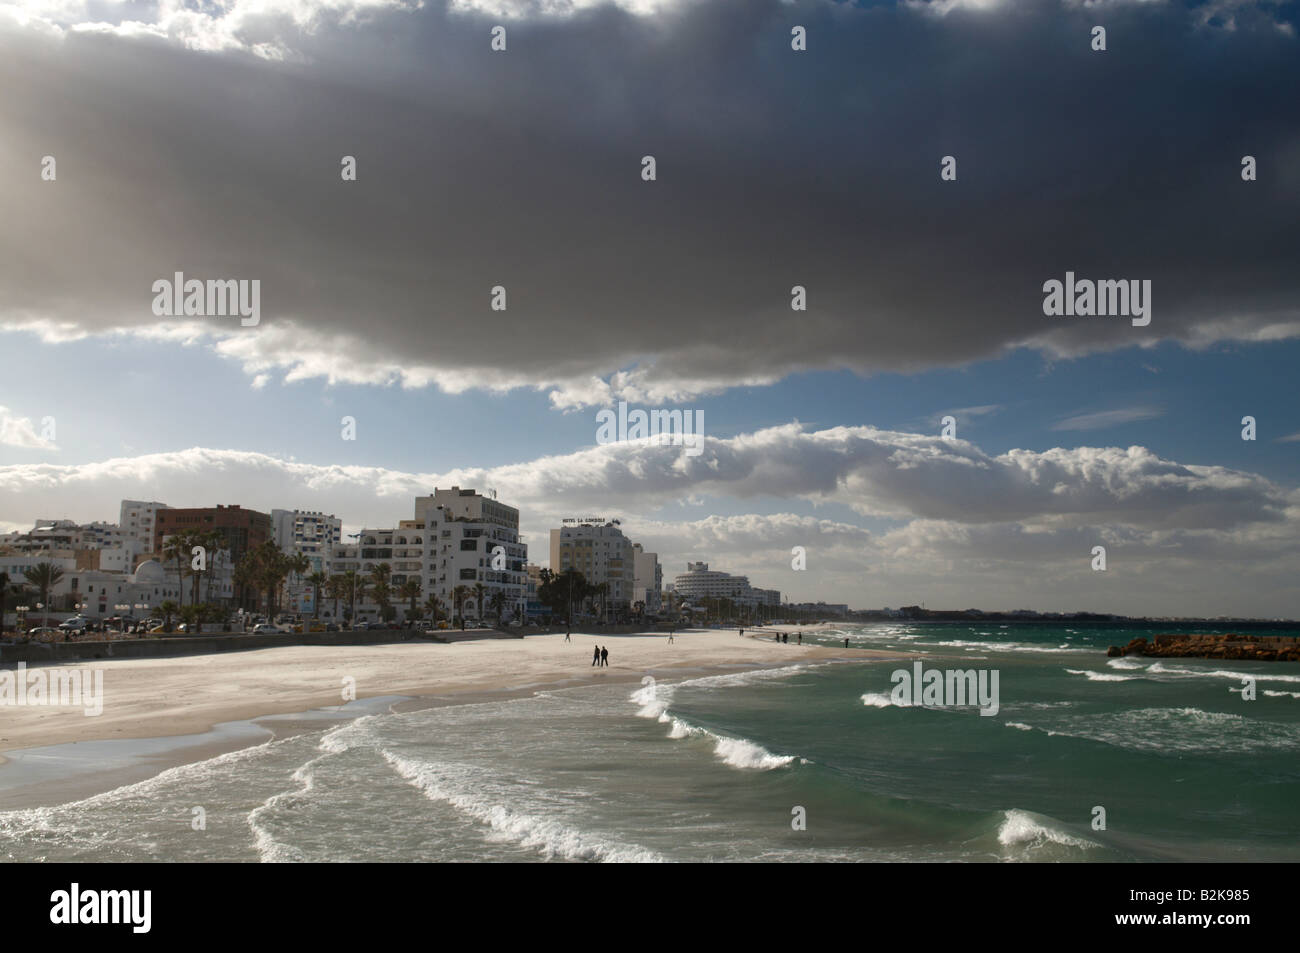 Storm clouds gather over the Tunisian city of Sousse. Stock Photo